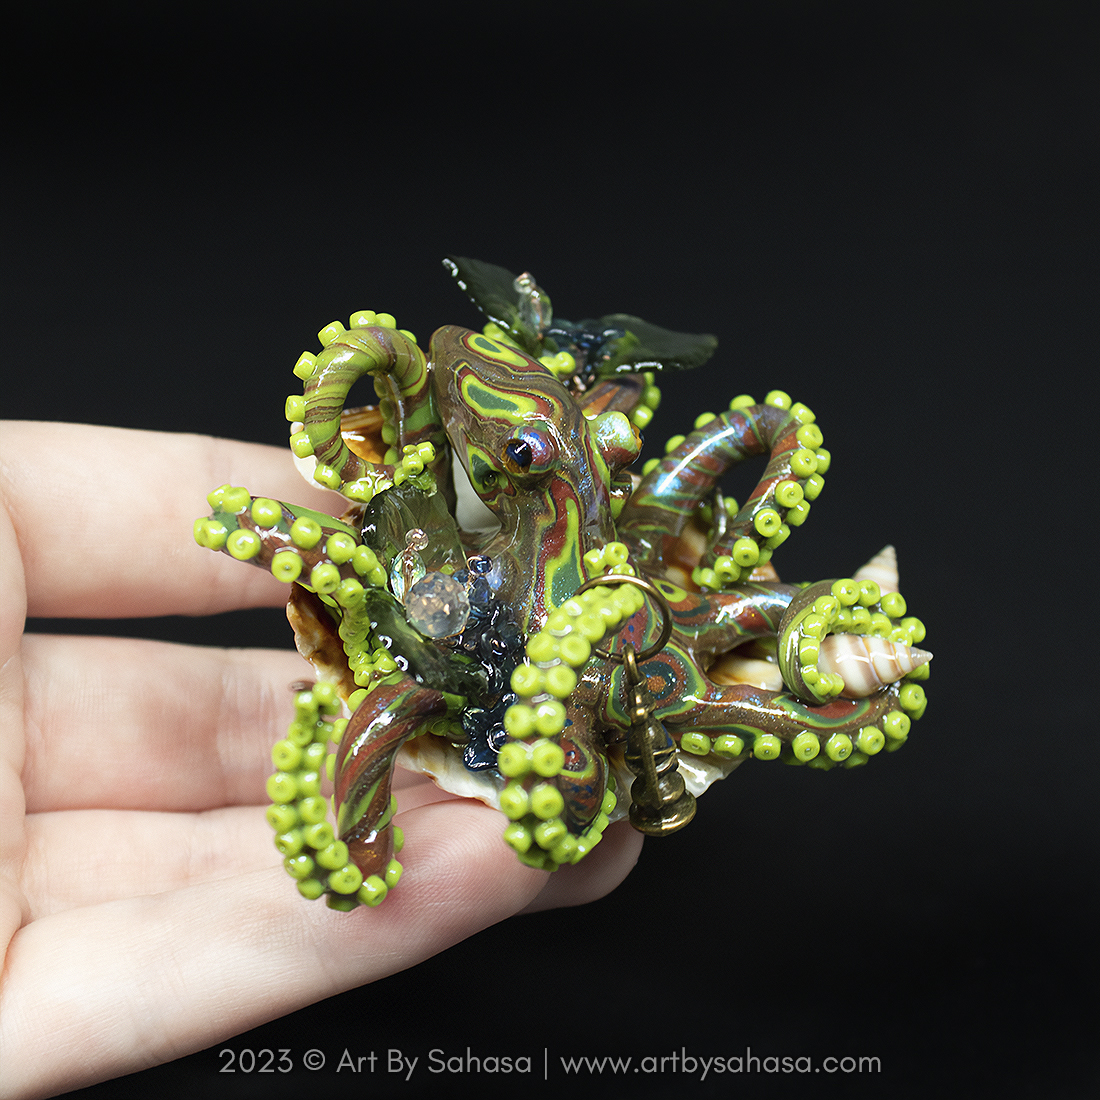 2023 – Octopus Sculpture inspired by Collection Room